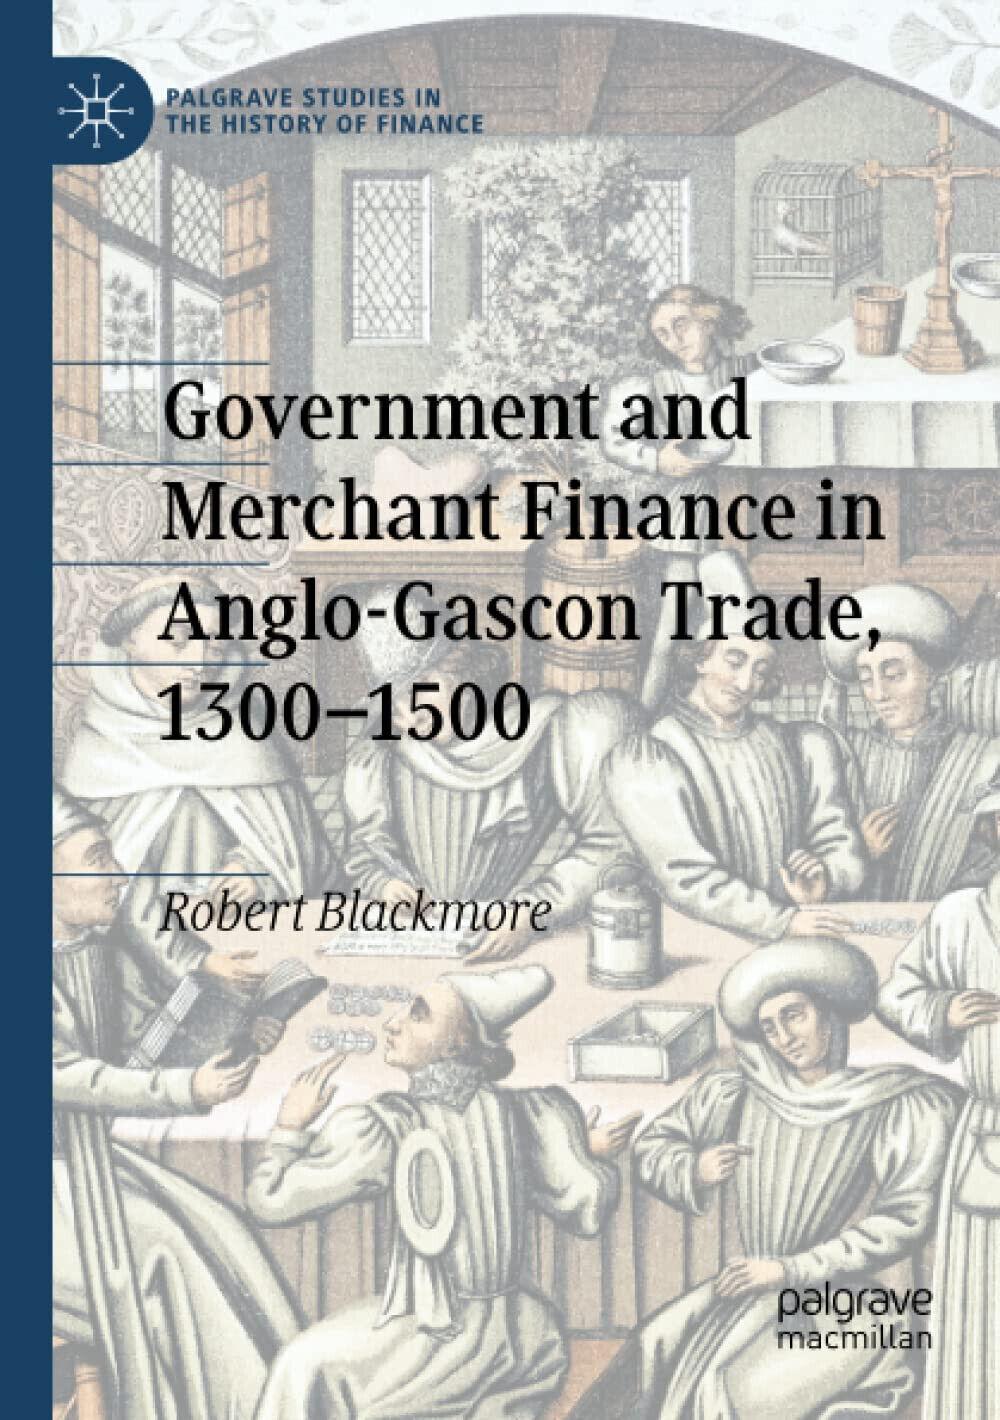 Government and Merchant Finance in Anglo-Gascon Trade, 1300-1500 - 2021